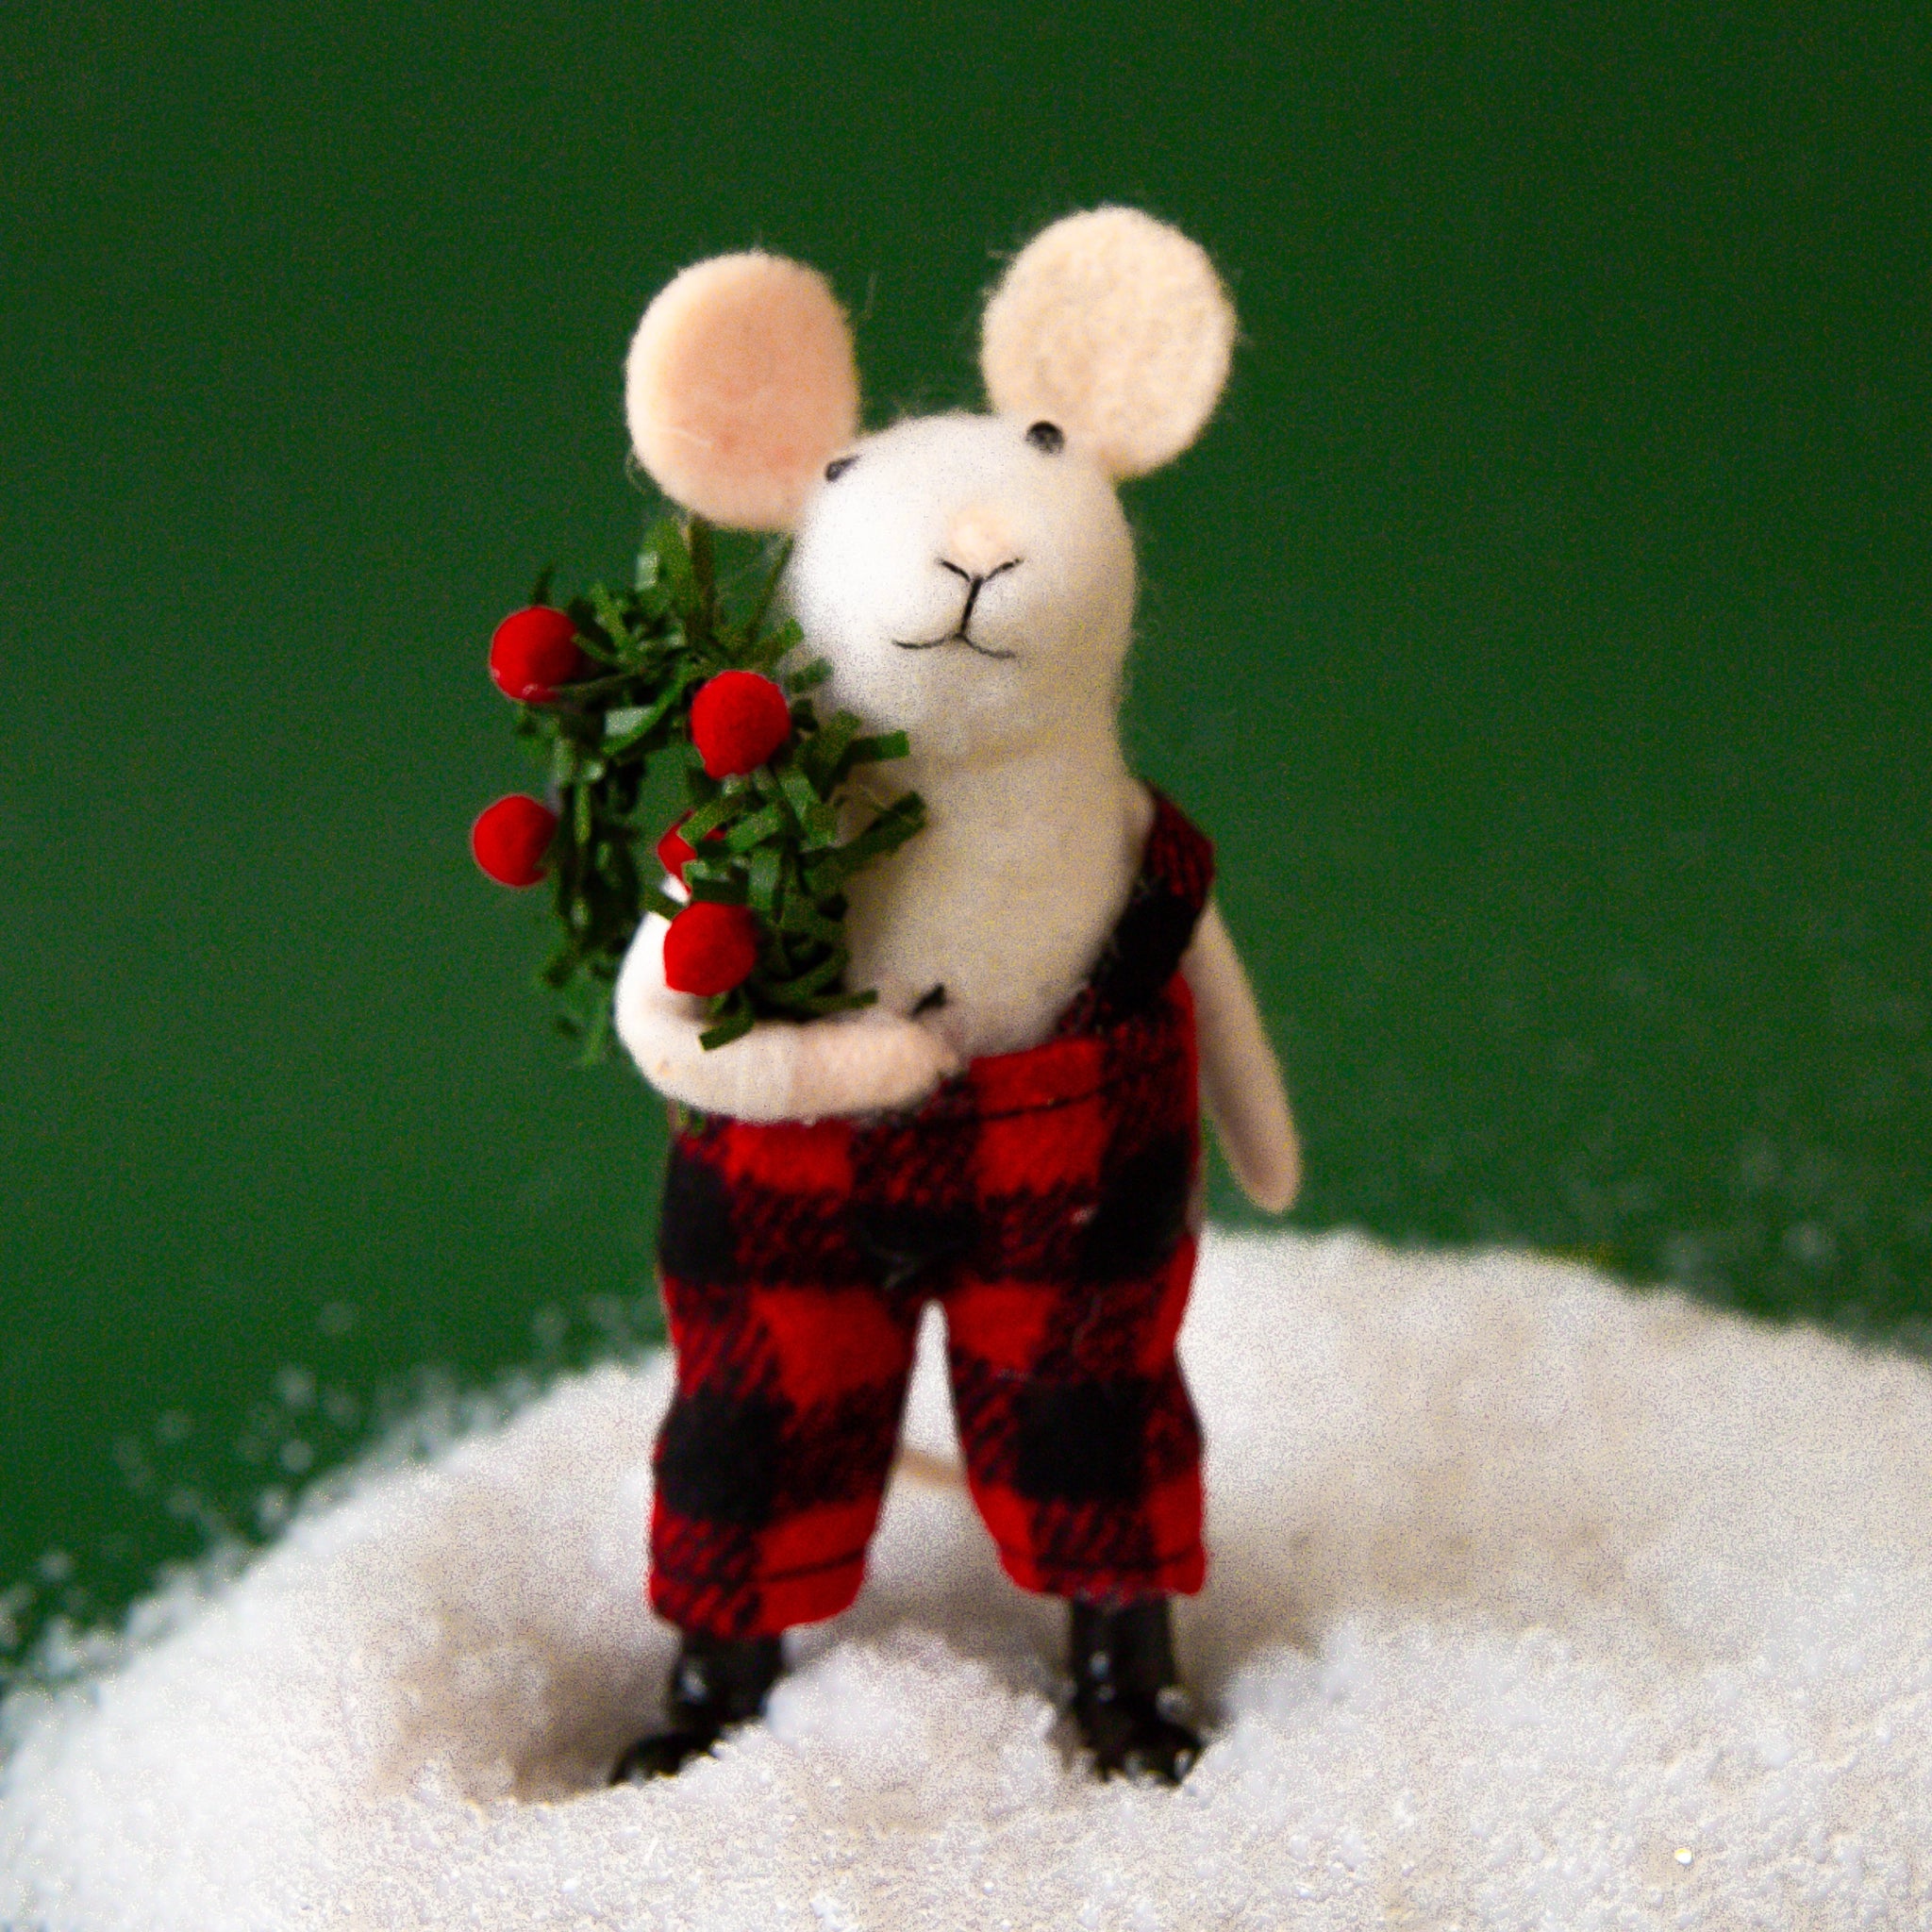 On a green background is a white mouse ornament in a black and white plaid outfit. 